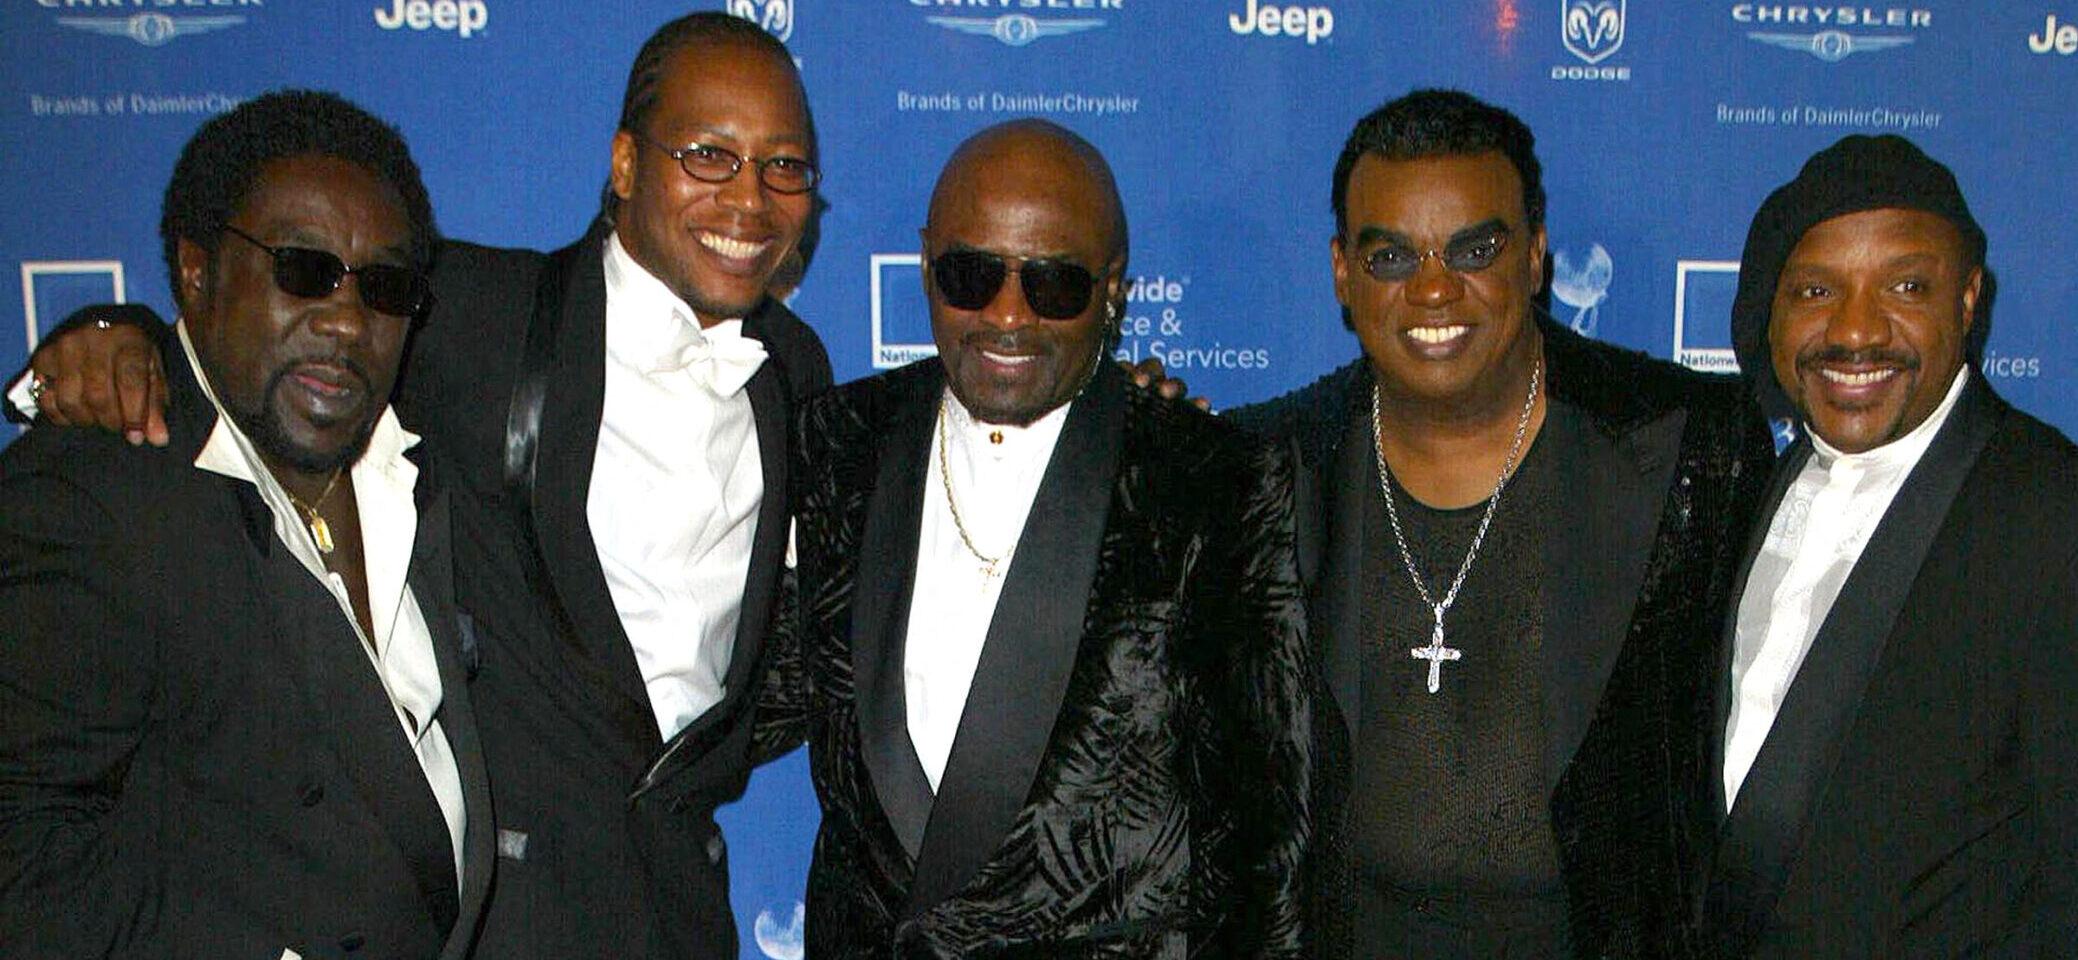 Rudolph Isley, Isley Brothers Founder’s Cause Of Death Revealed